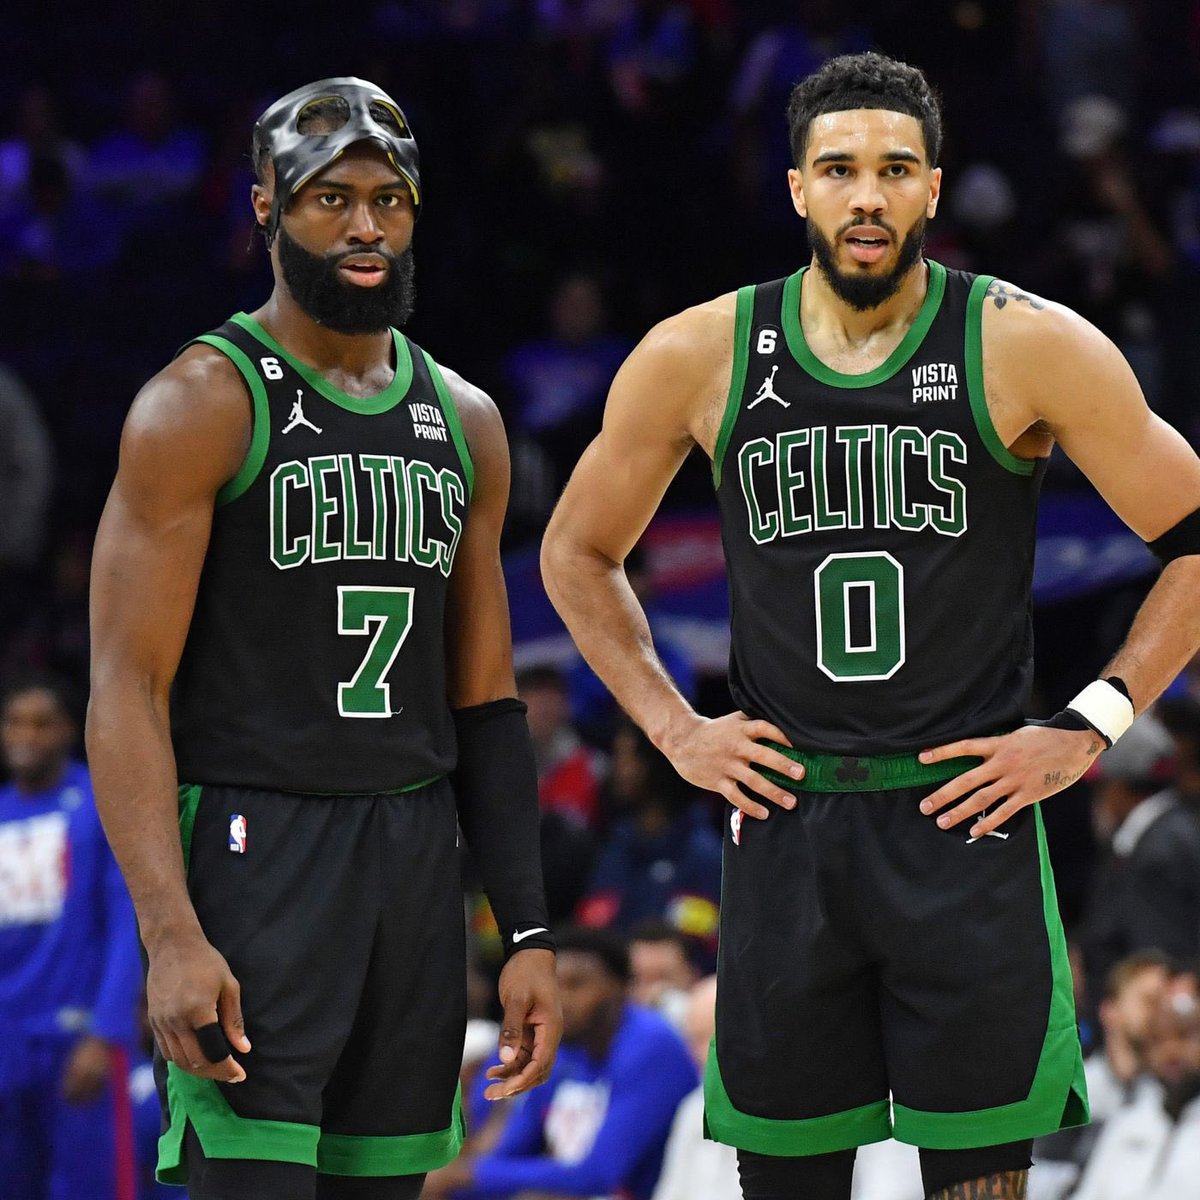 Tatum has NEVER been better than Jaylen Brown. They’ve tried to force Tatum into a face of a league and contender role, but his ability just isn’t a fit… he’s not even the best player on his team.